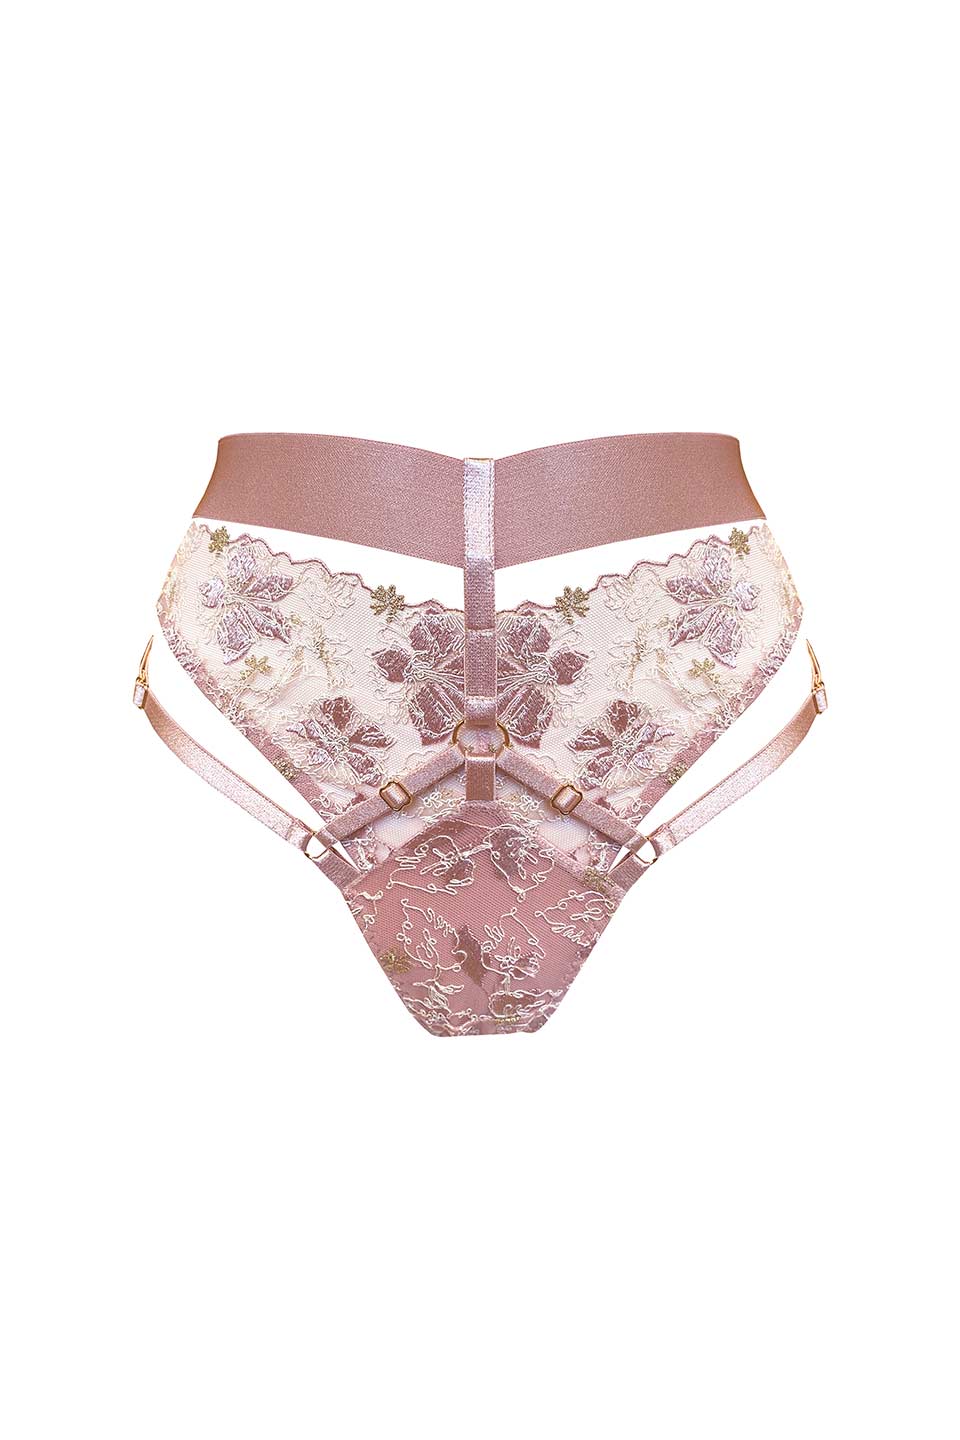 Shop online trendy Rose Undergarments from Atelier Bordelle Fashion designer. Product gallery 1